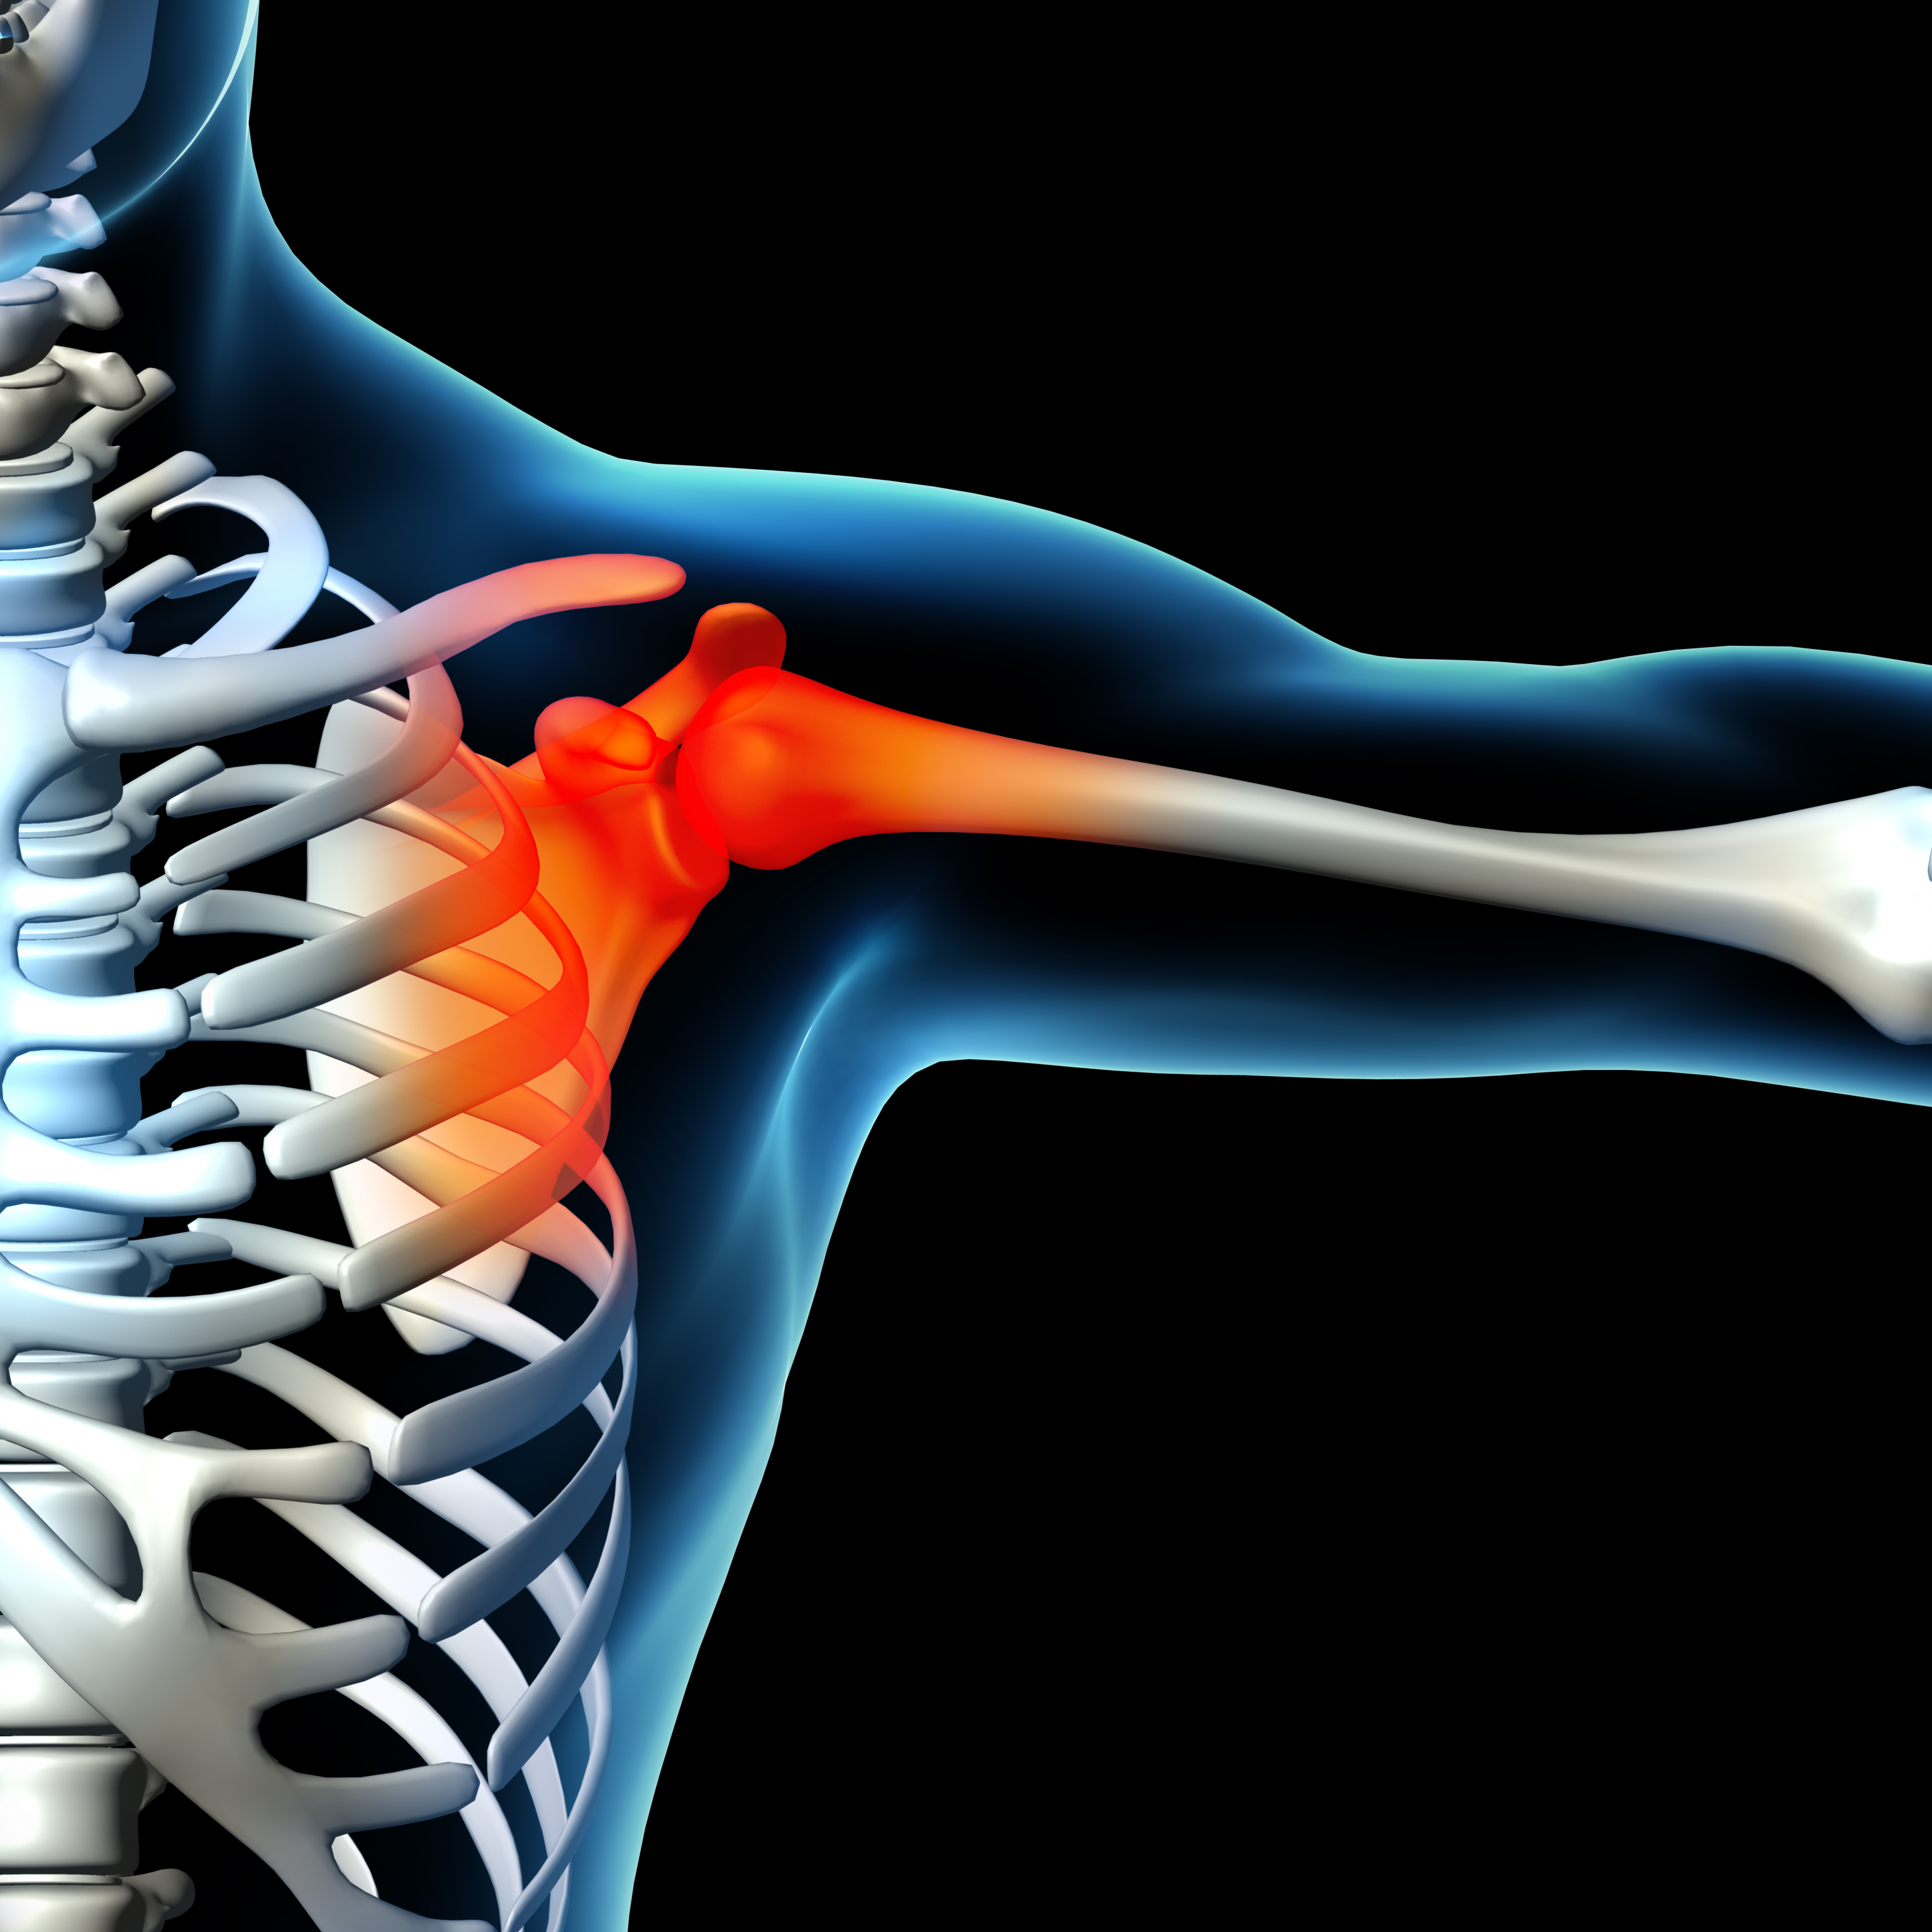 Human shoulder pain with the anatomy of a skeleton shoulder